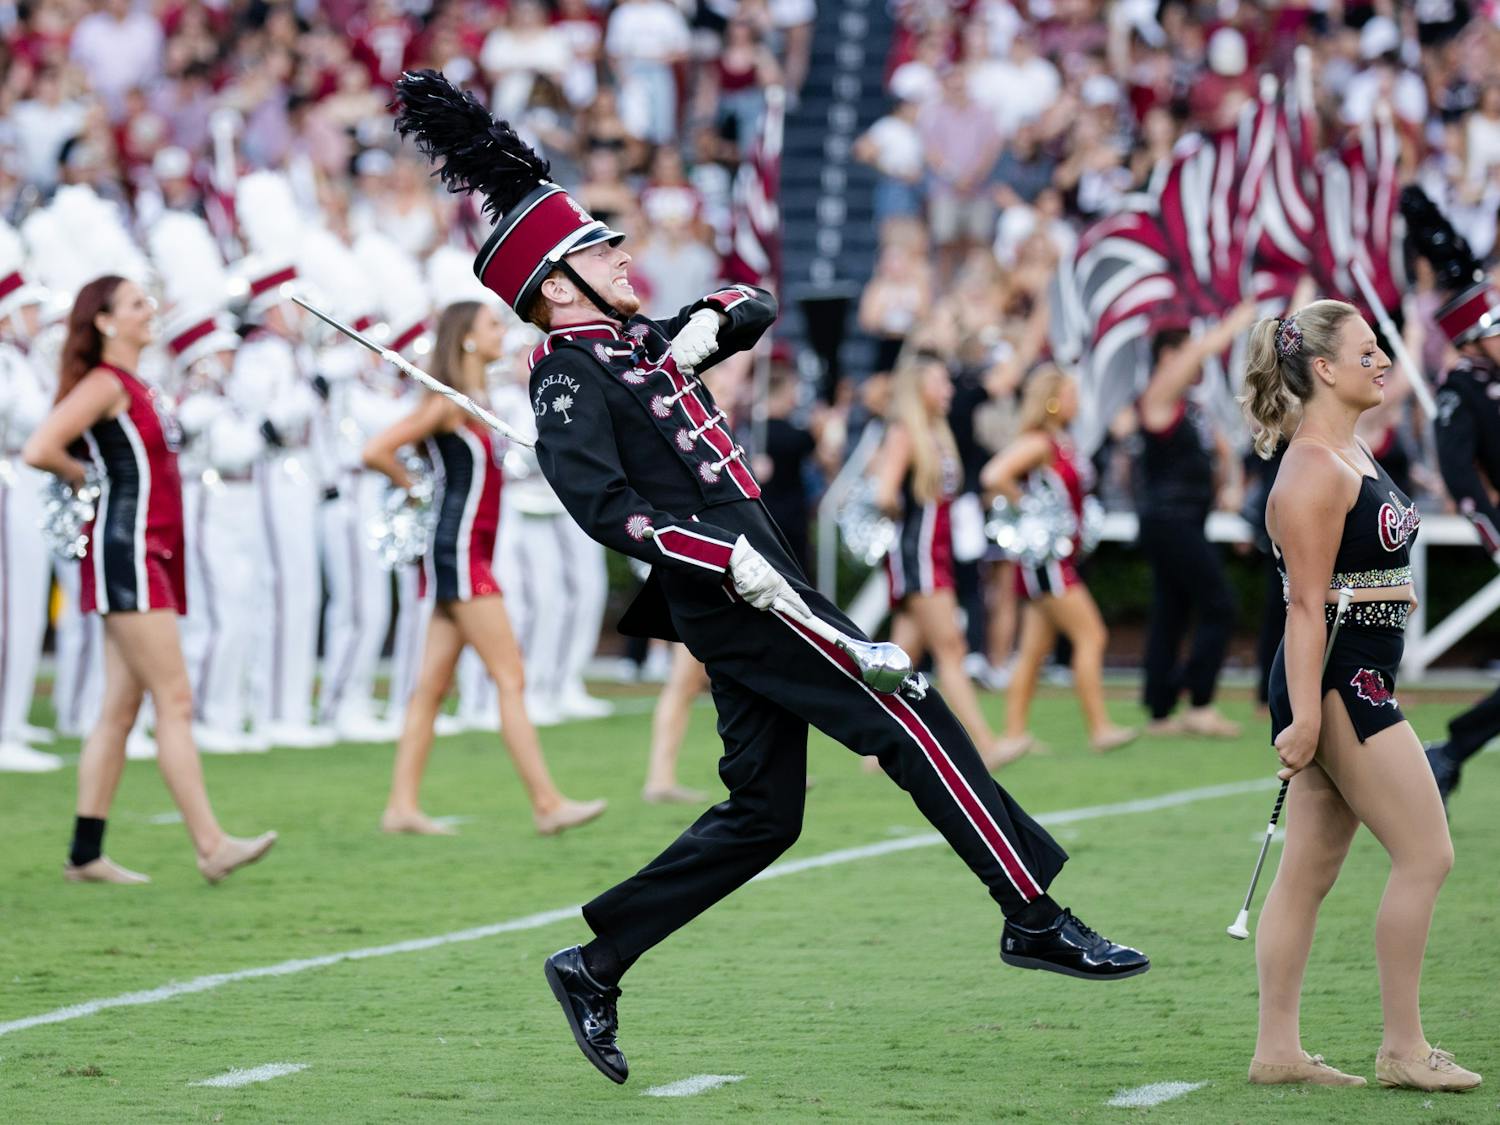 A Carolina Band drum major jumps onto the field during pre-game festivities on Sept. 3, 2022. The Gamecocks beat Georgia State 35-14.&nbsp;